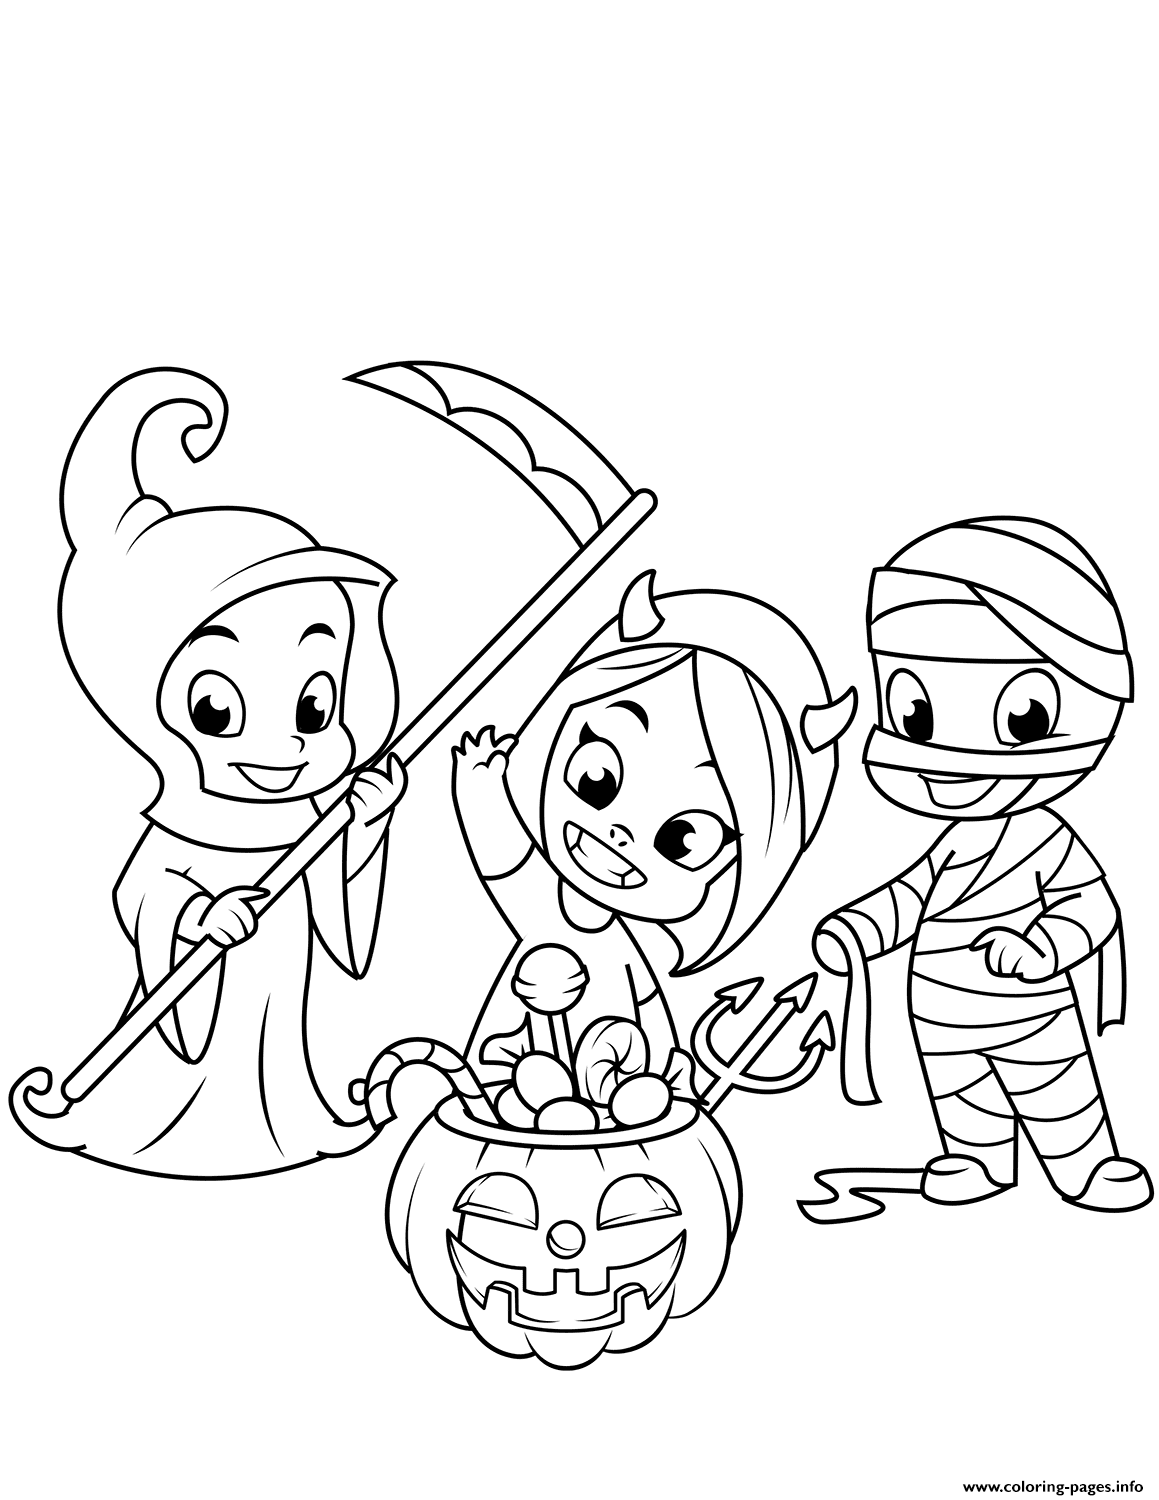 Cute Little Grim Reaper Devil Mummy And A Jack O Lantern With Candies Halloween coloring